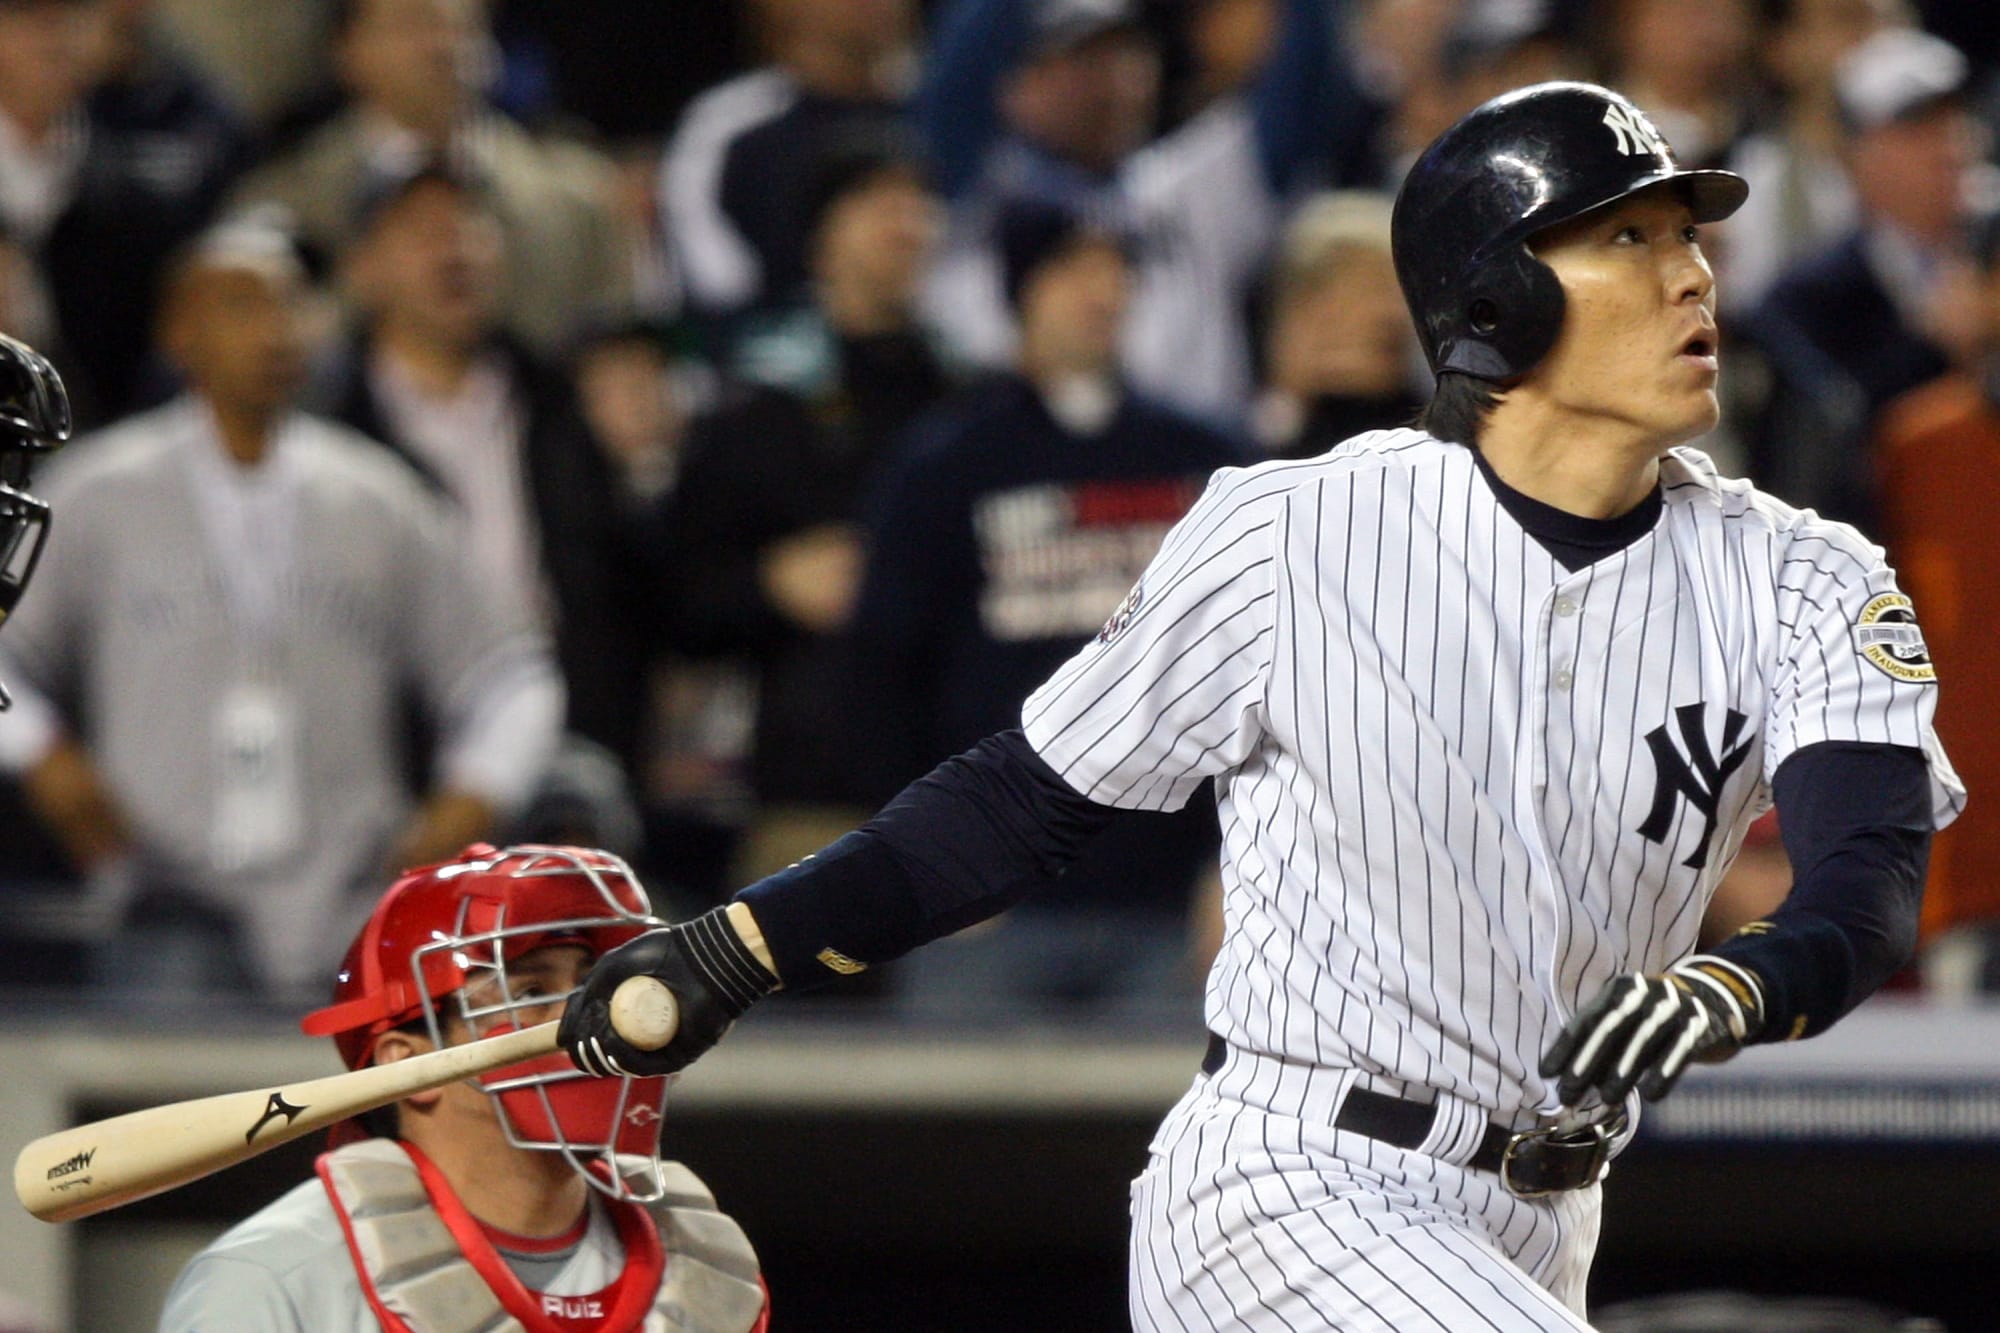 With Matsui Back in Left, One Less Issue for Yankees - The New York Times